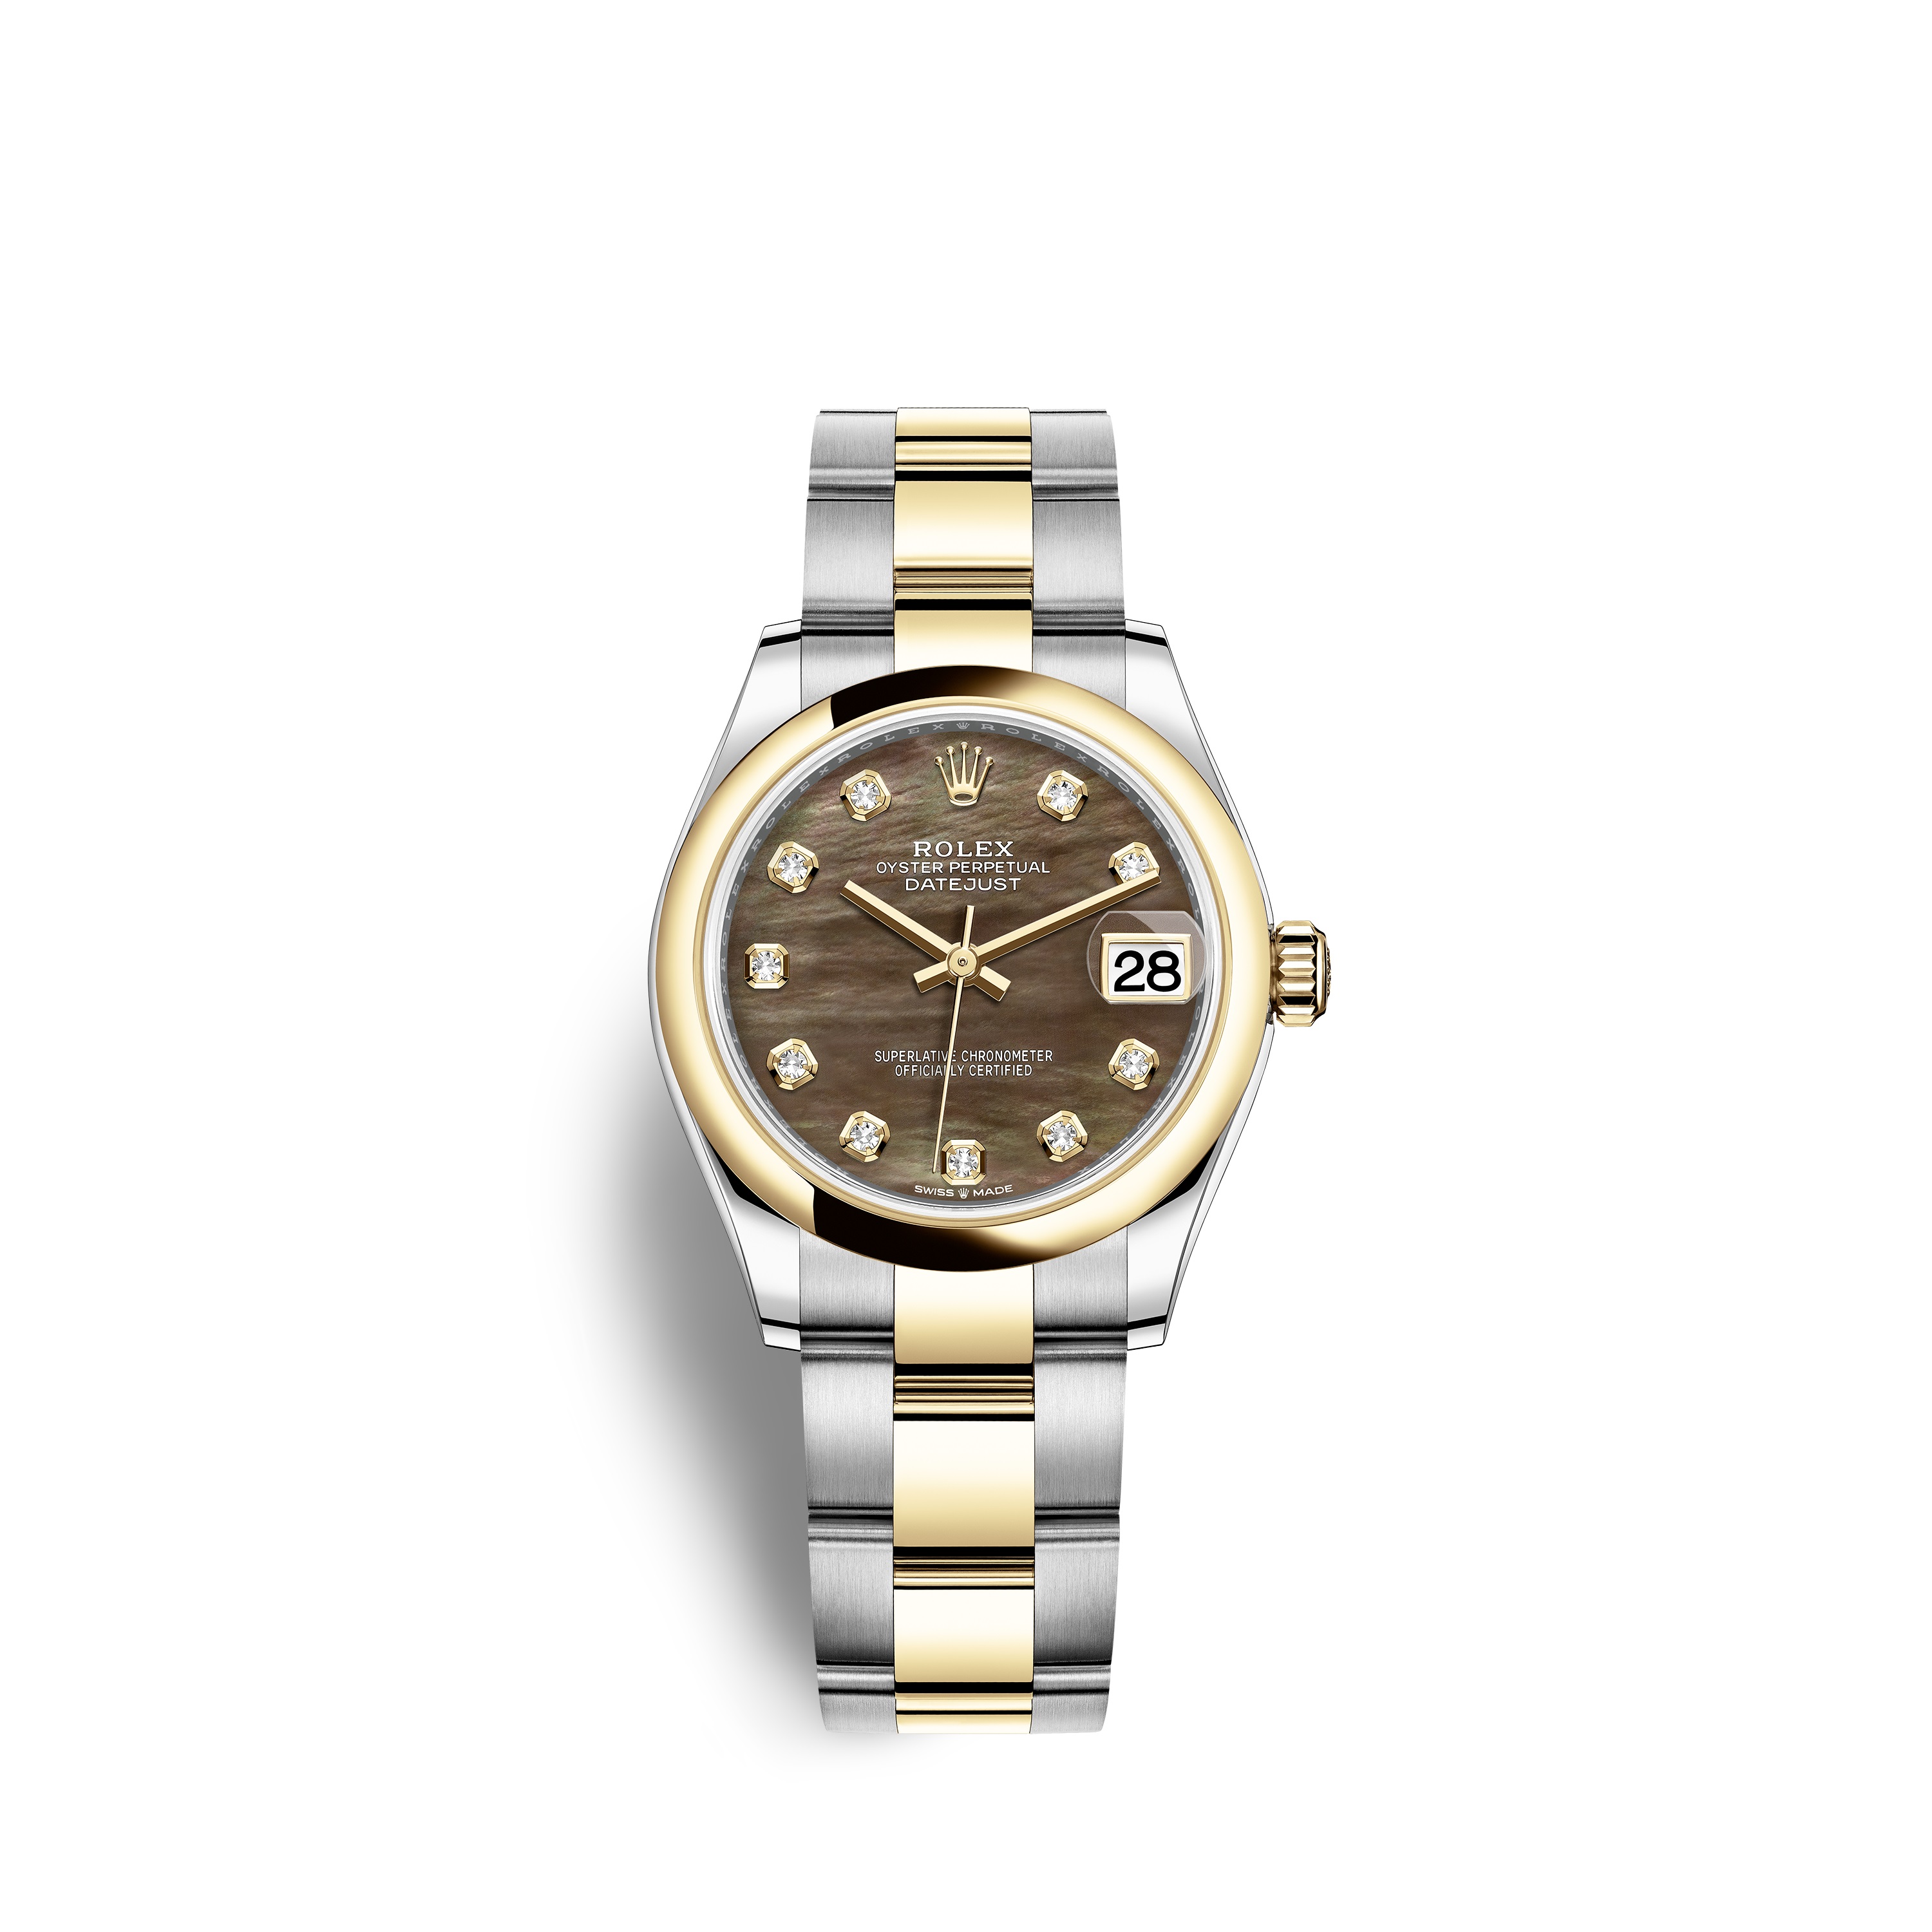 Datejust 31 278243 Gold & Stainless Watch (Black Mother-of-Pearl Set with Diamonds)